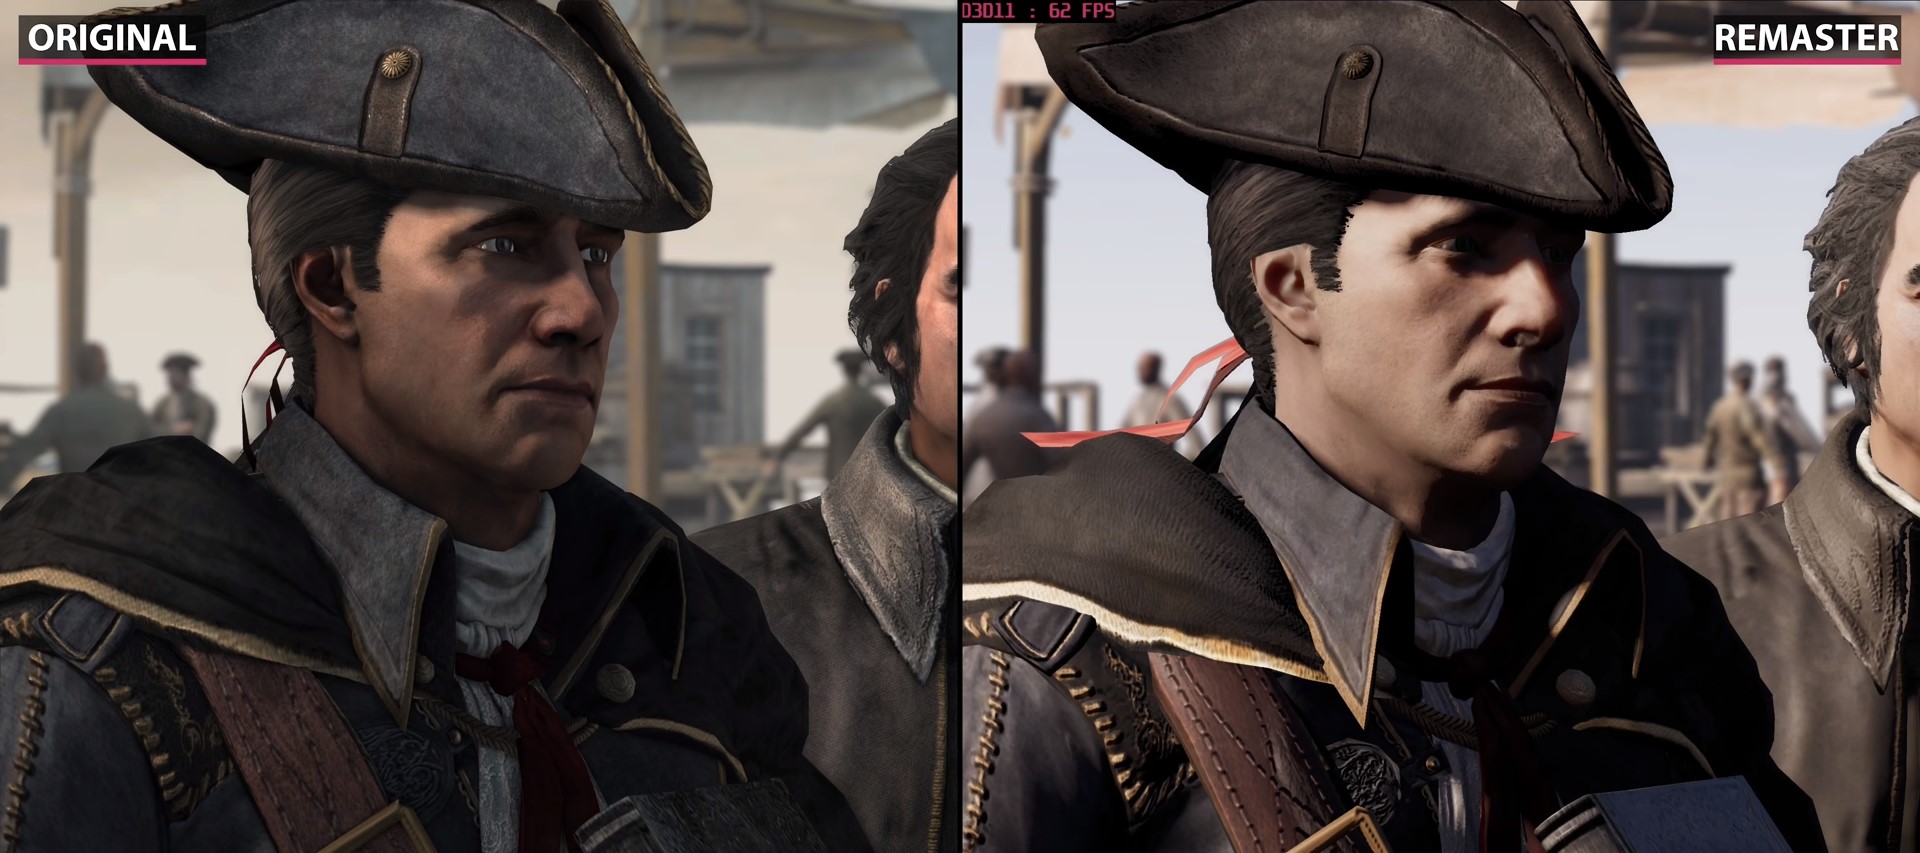 AC 3 Remastered. Assassin's Creed 3 Remastered. AC III Remastered. Assassin's Creed 3 Remastered vs Original.